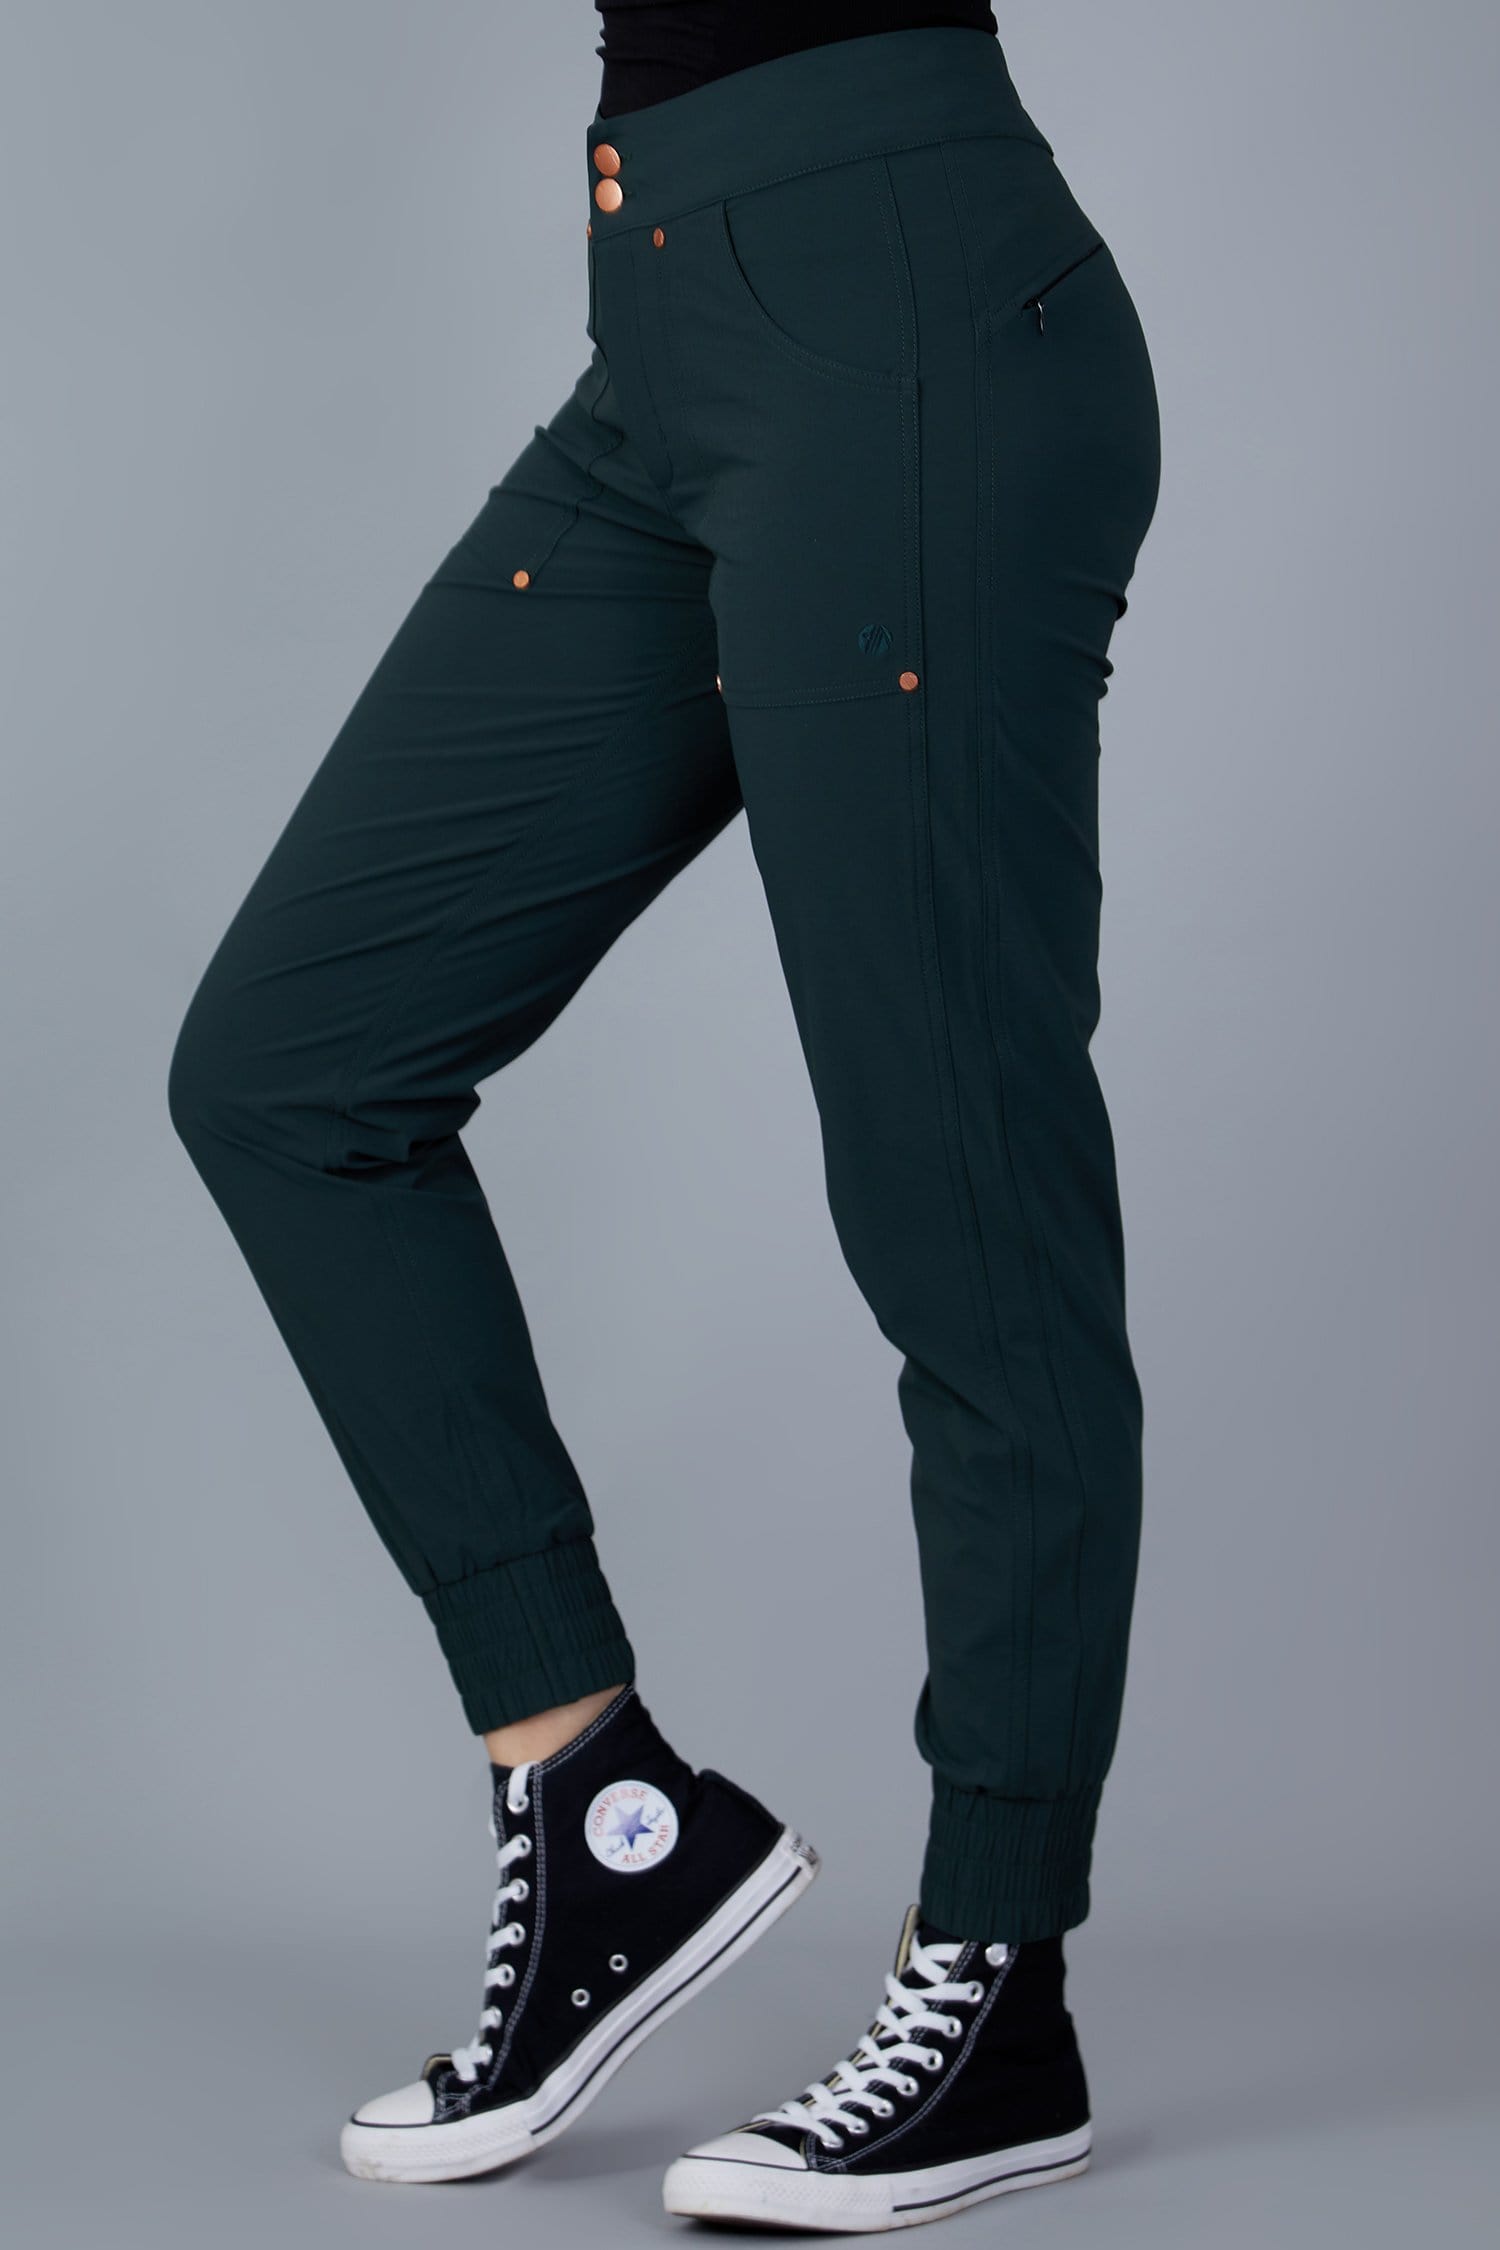 Casual Stroll Pants - Forest Green - 24r / Uk6 - Womens - Acai Outdoorwear